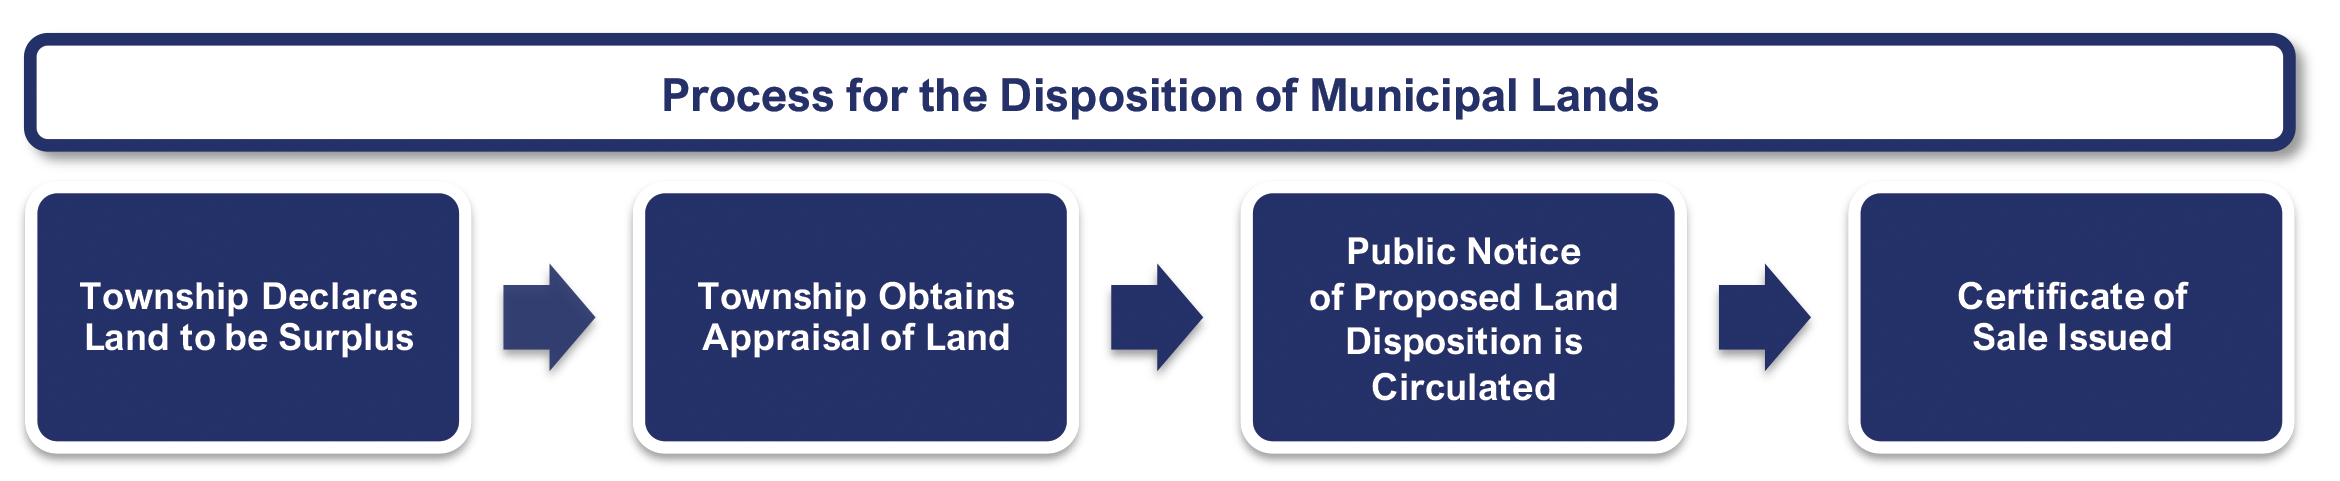 Process for the disposal of municipal lands